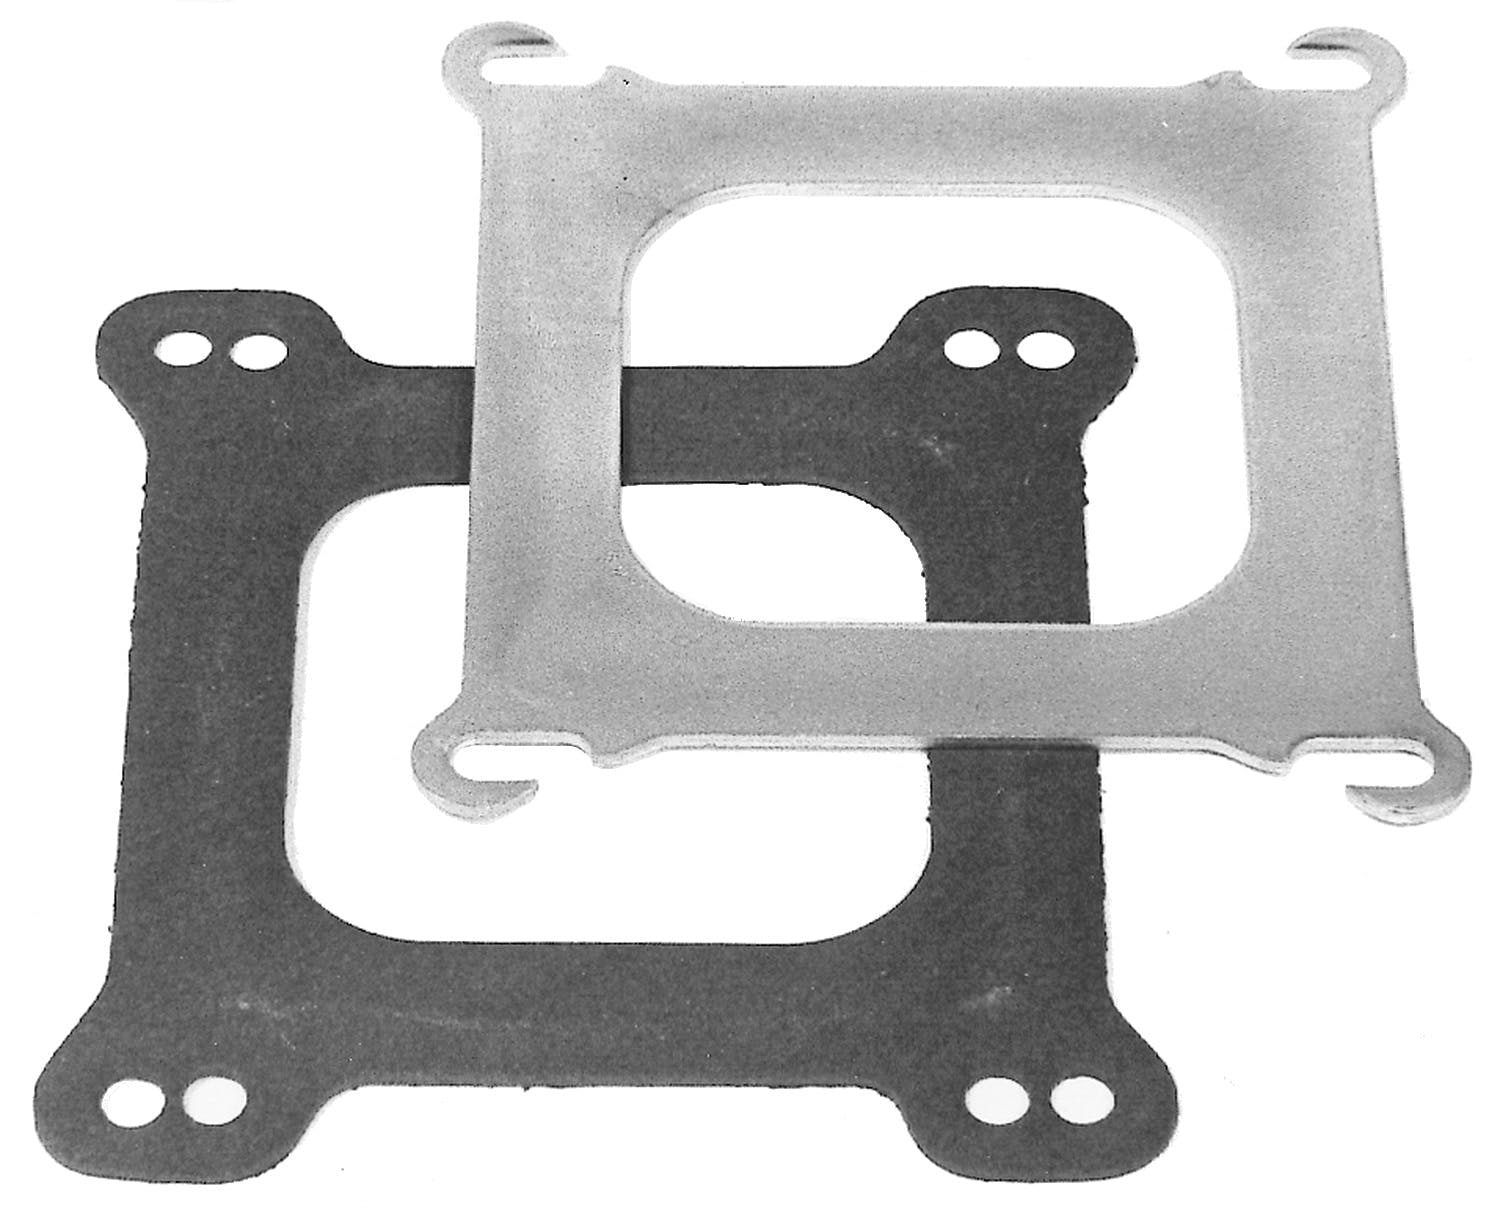 Edelbrock 2732 Square-Bore to Spread-Bore Adapter Plate .100 thick for Edelbrock Manifolds